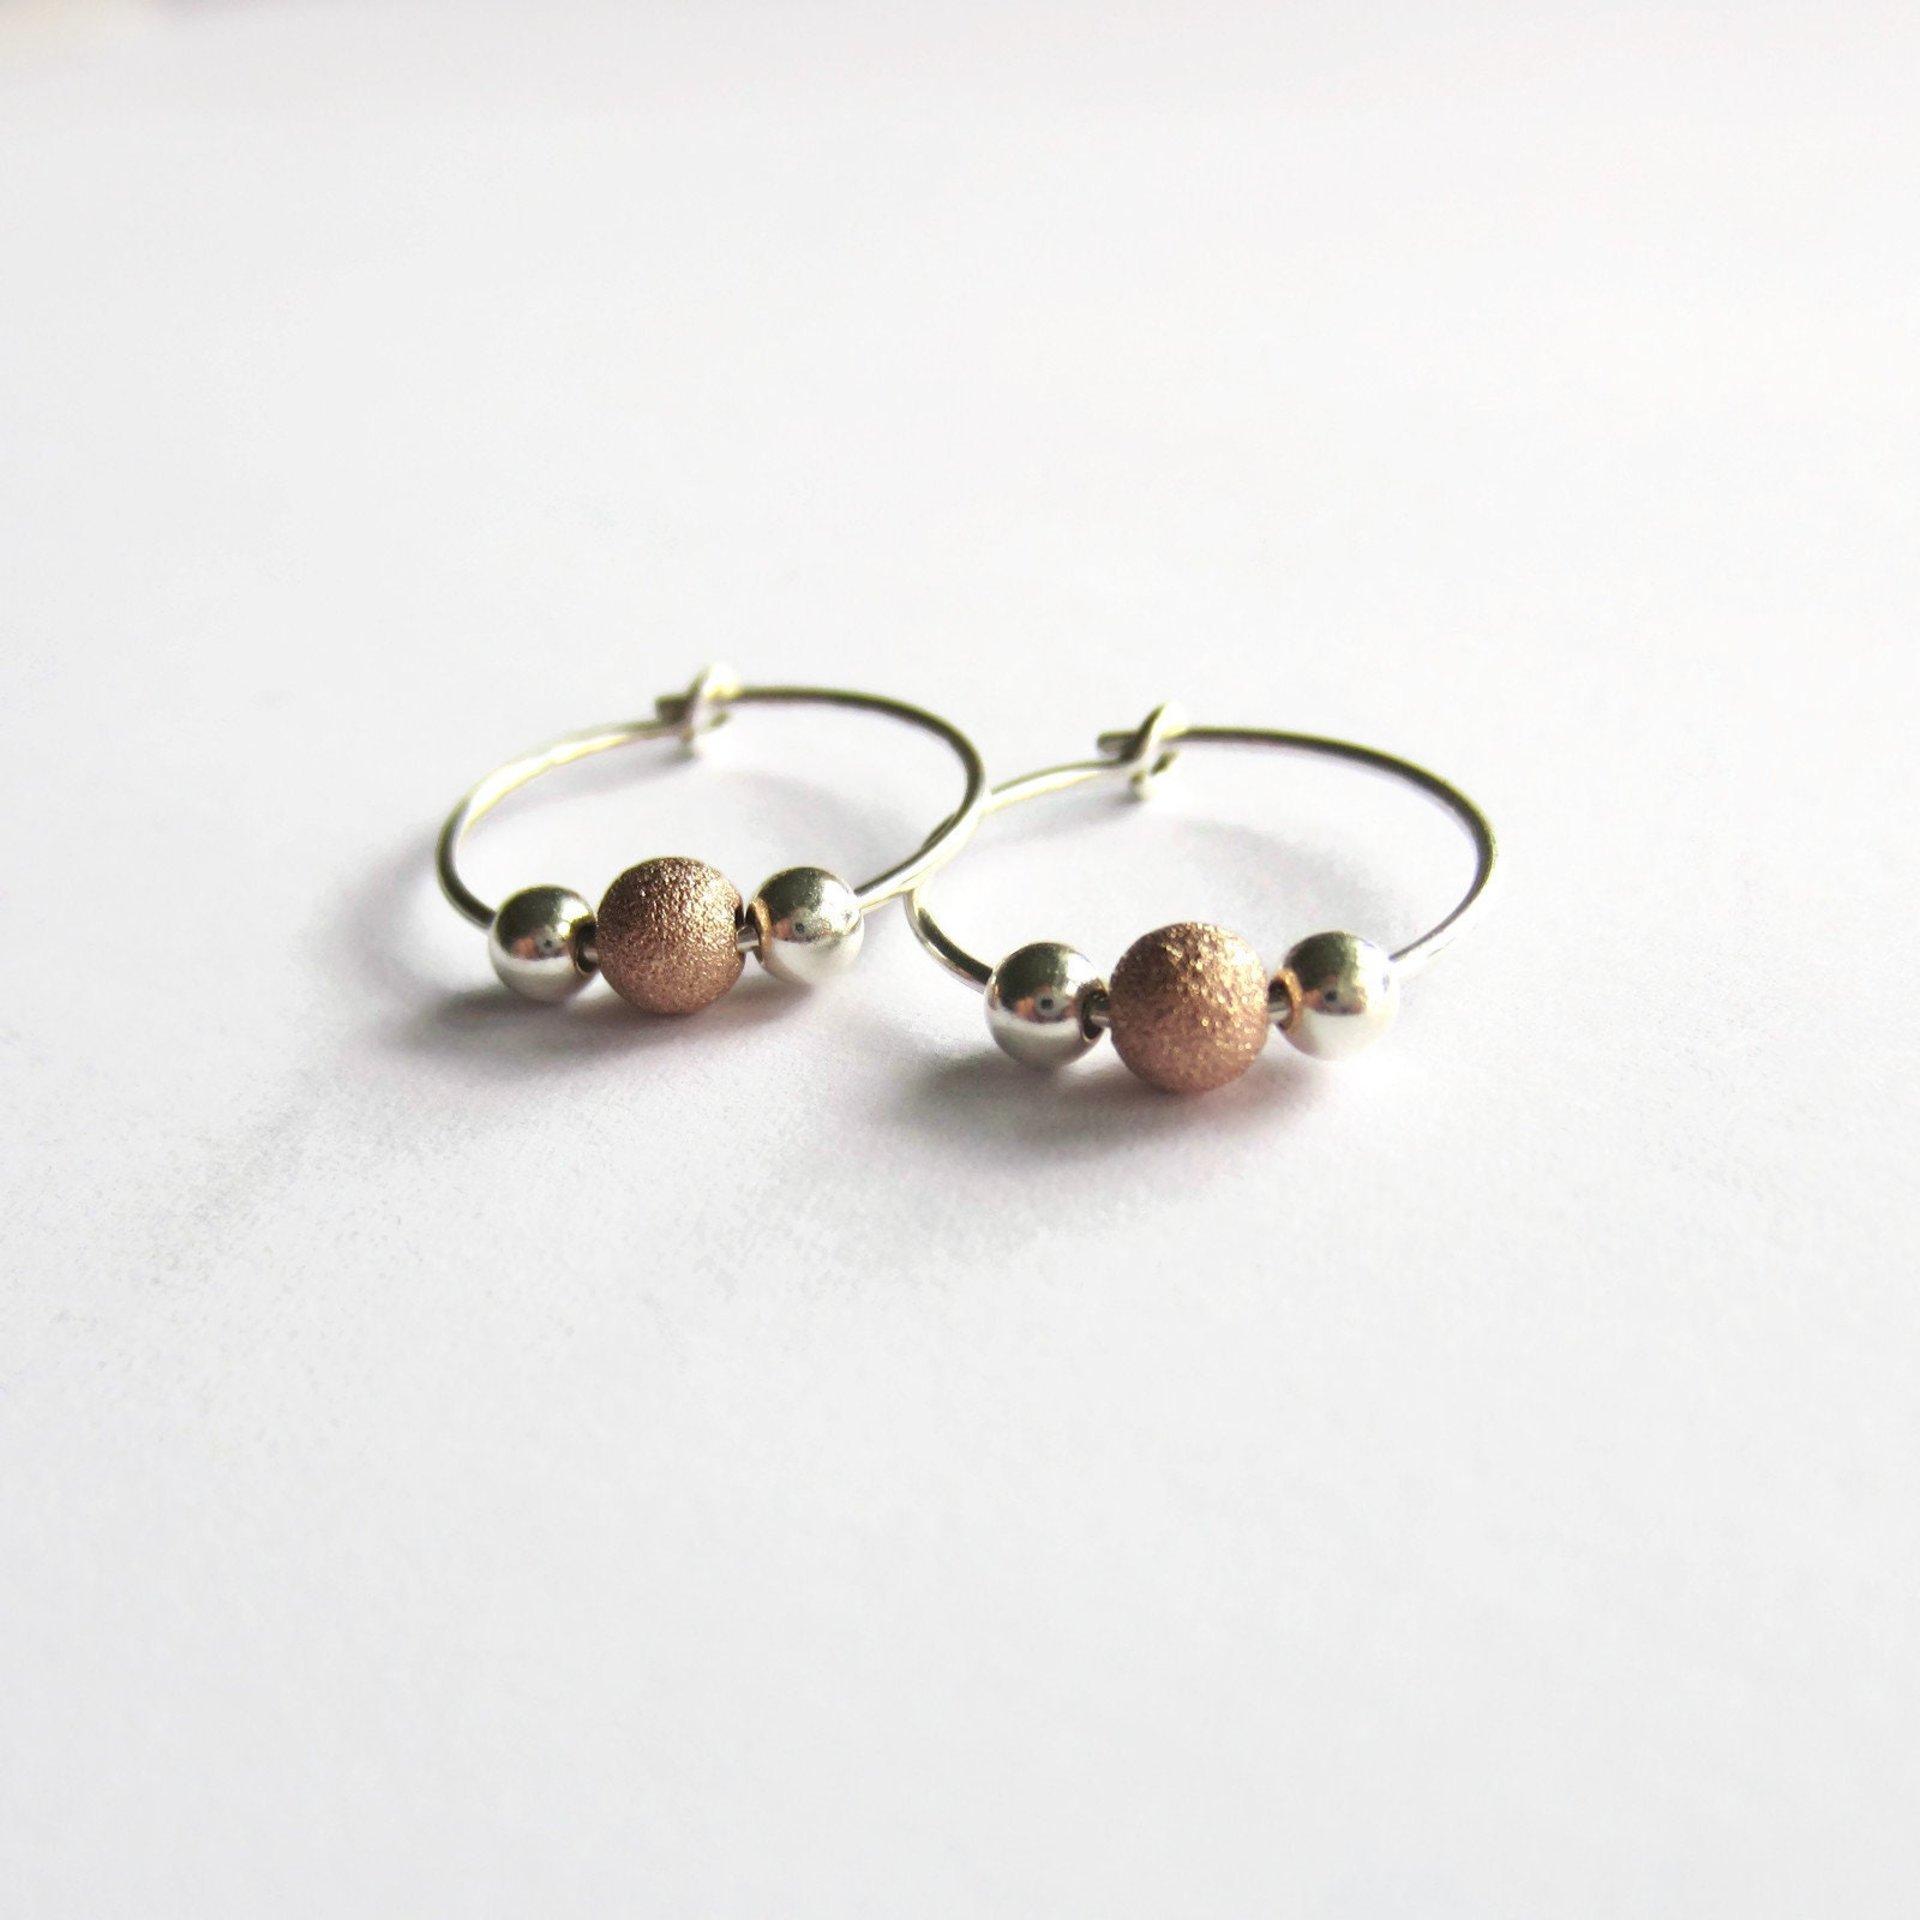 Sterling Silver and Rose Gold Filled Stardust Bead Hoop Earrings ~ Handmade by The Tiny Tree Frog Jewellery